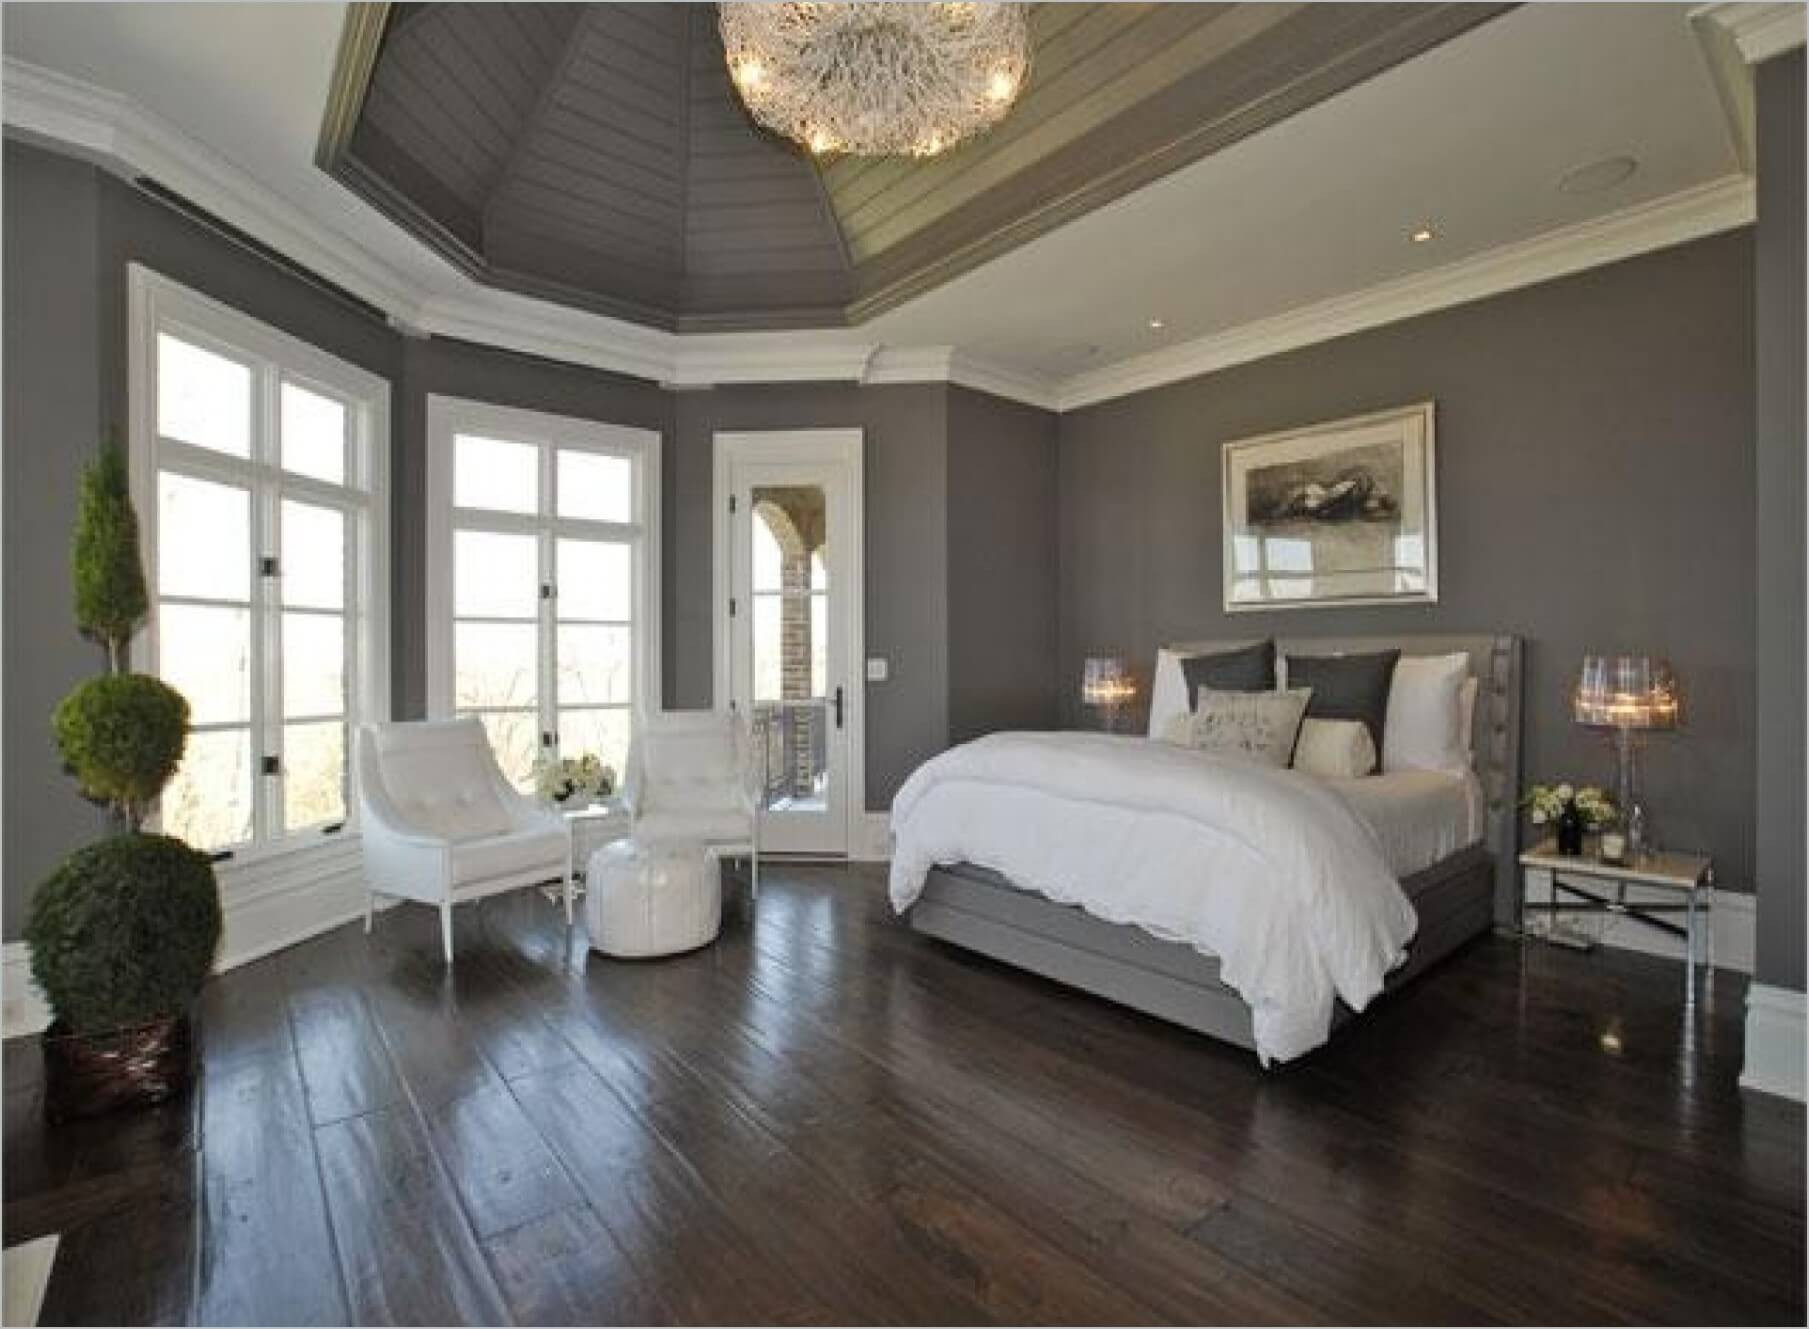 Master Bedroom Paint
 20 Best Color Ideas for Bedrooms 2018 Interior